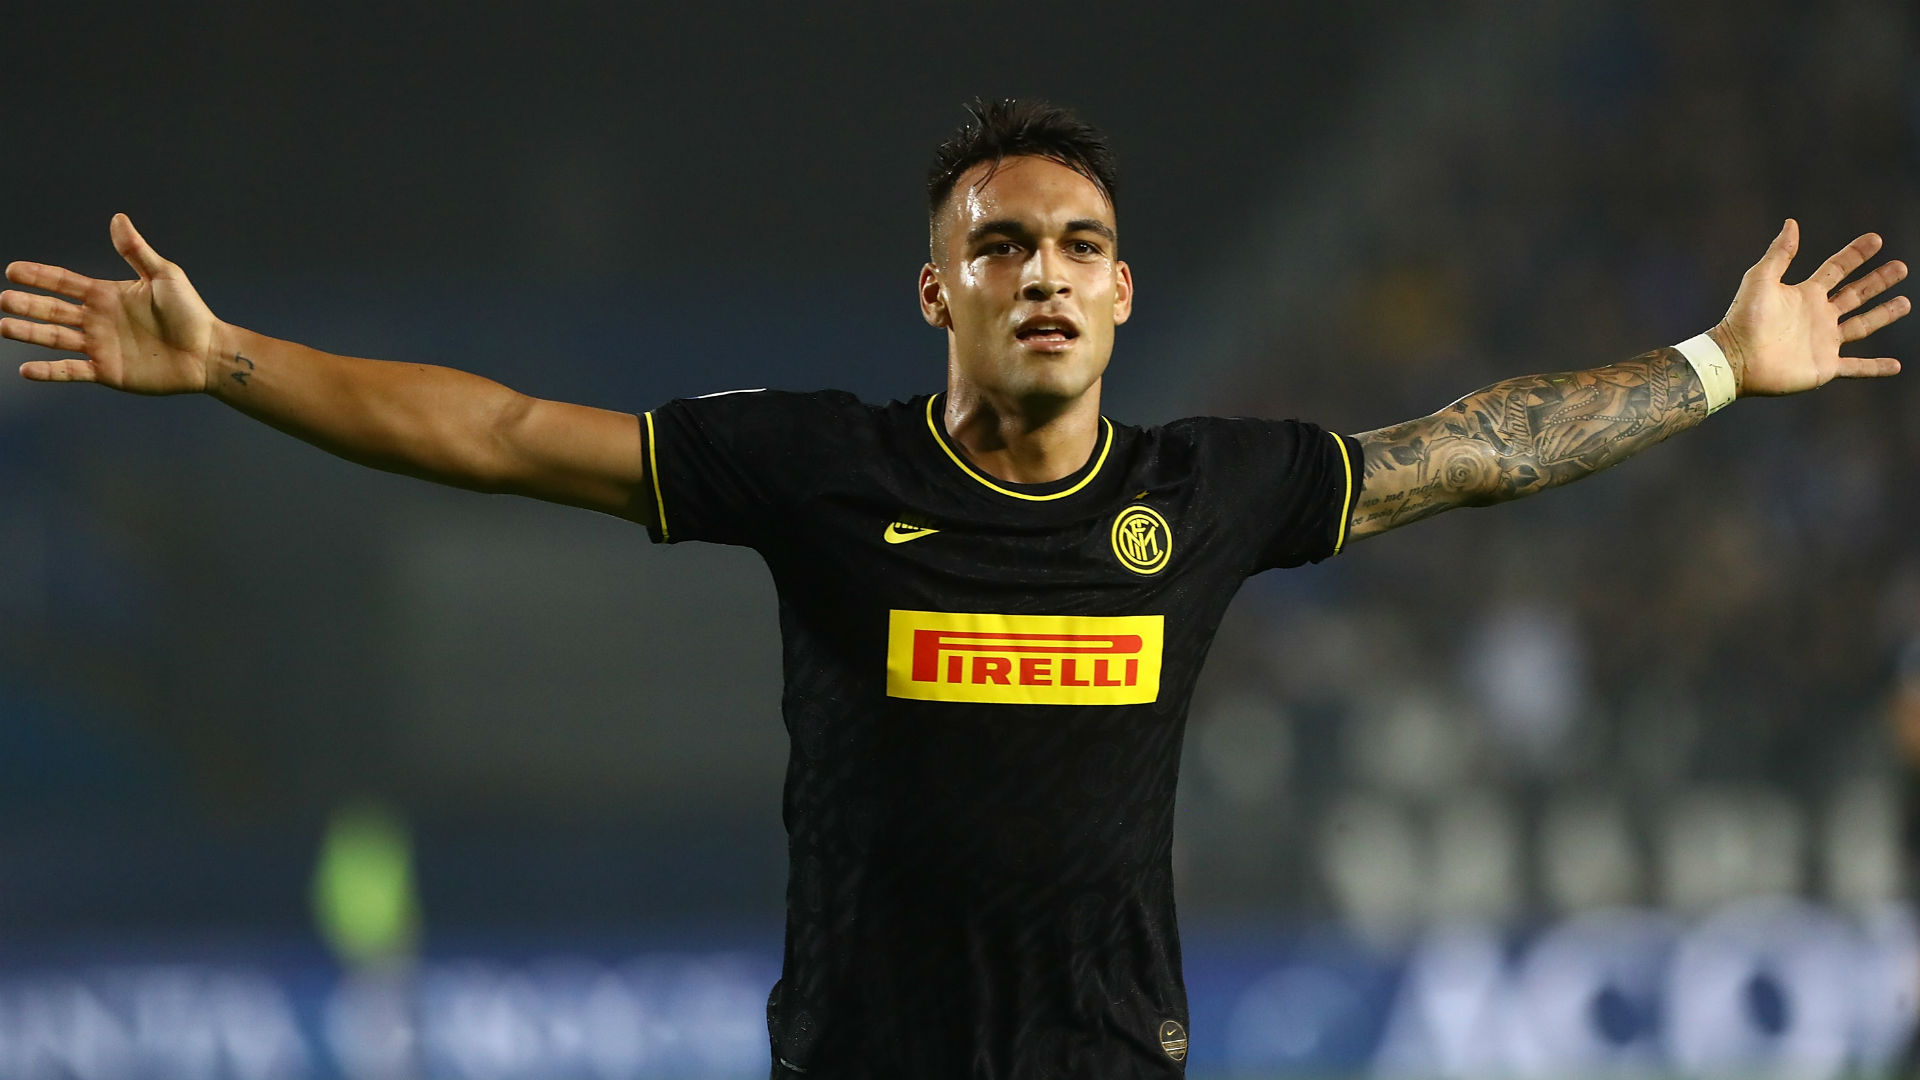 Inter want Lautaro Martinez's release clause paid, and Barcelona are continuing to chase the star forward.